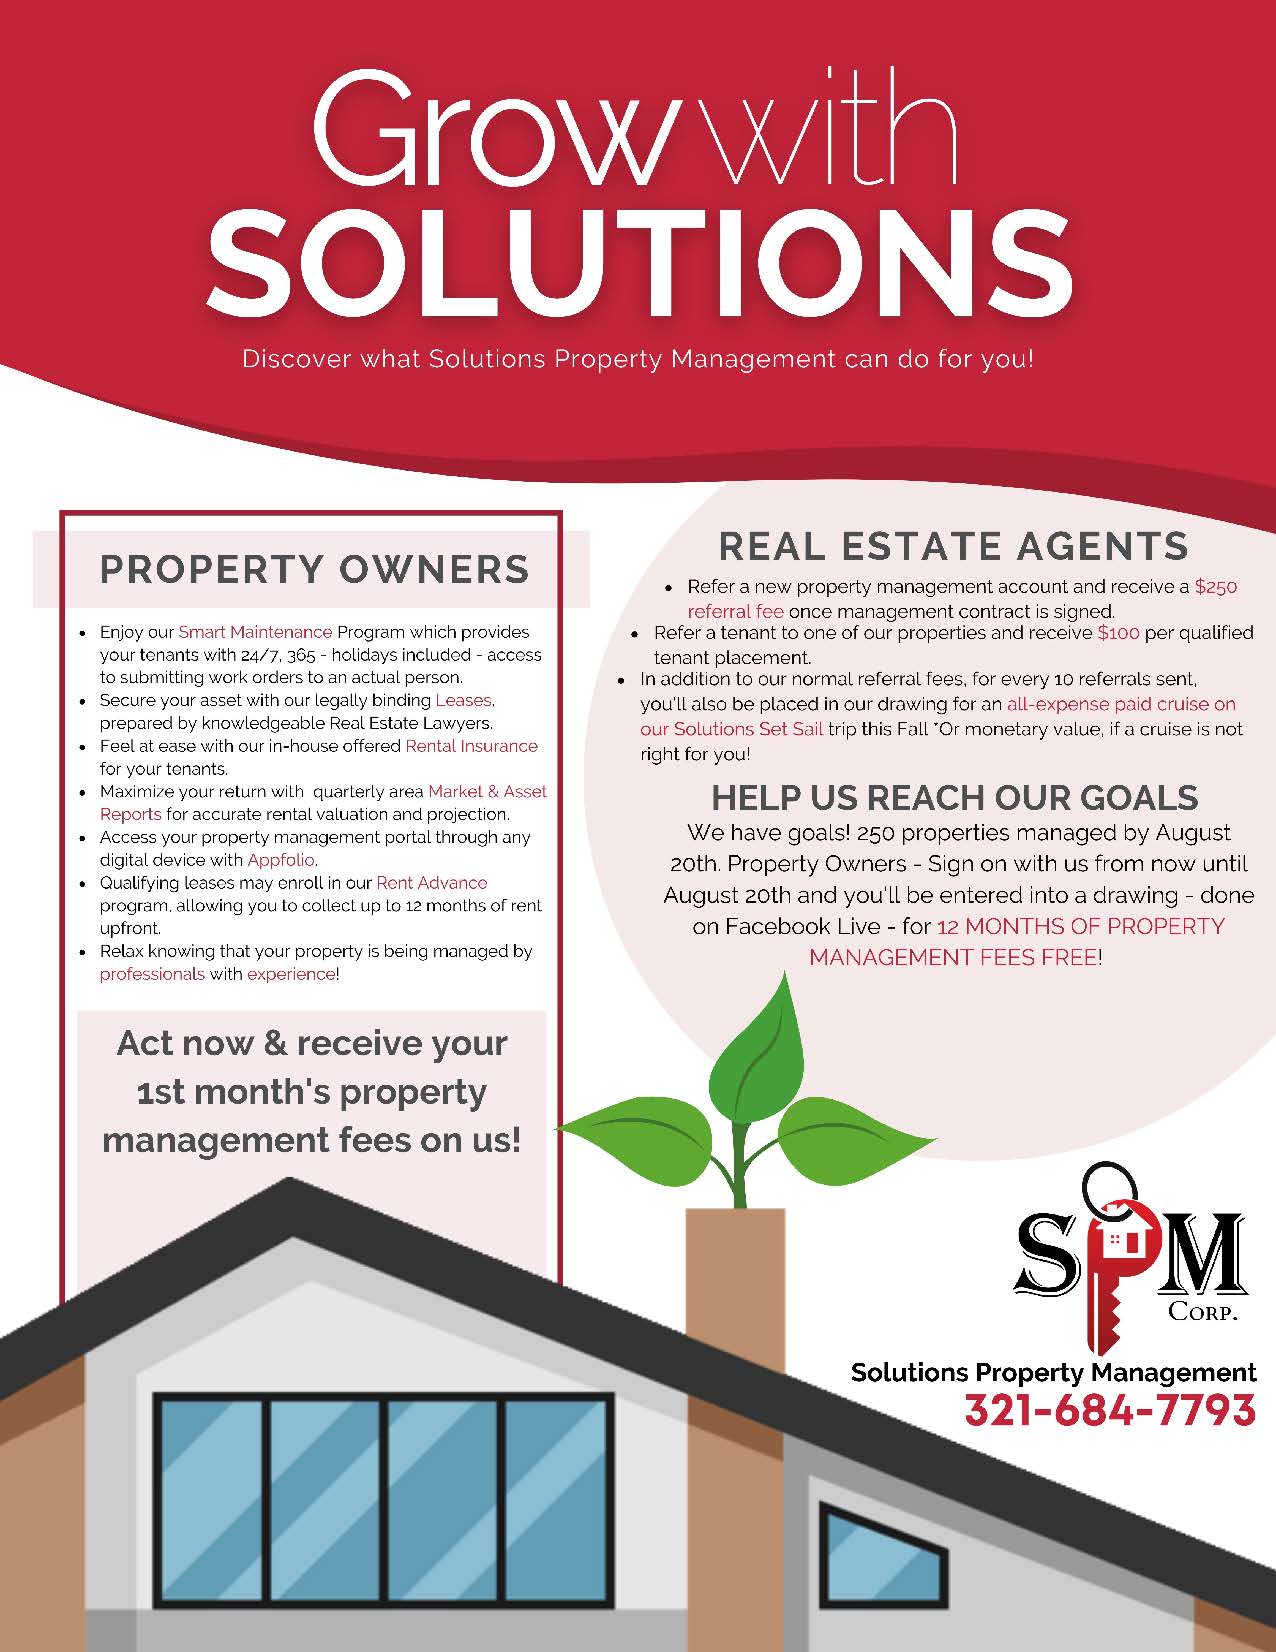 Discover What Solutions Property Management Can Do For You - 1st Month FREE Property Management Fees!